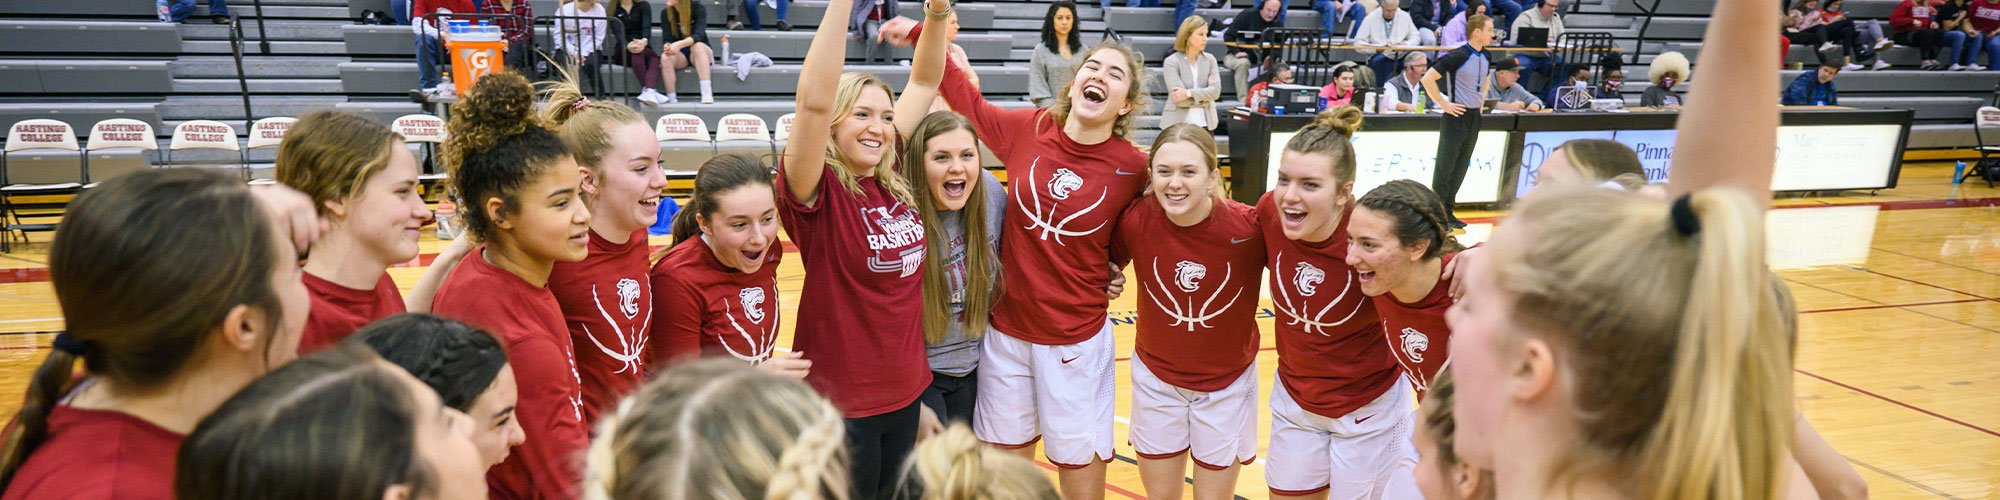 Hastings College women's basketball team cheering in a circle.